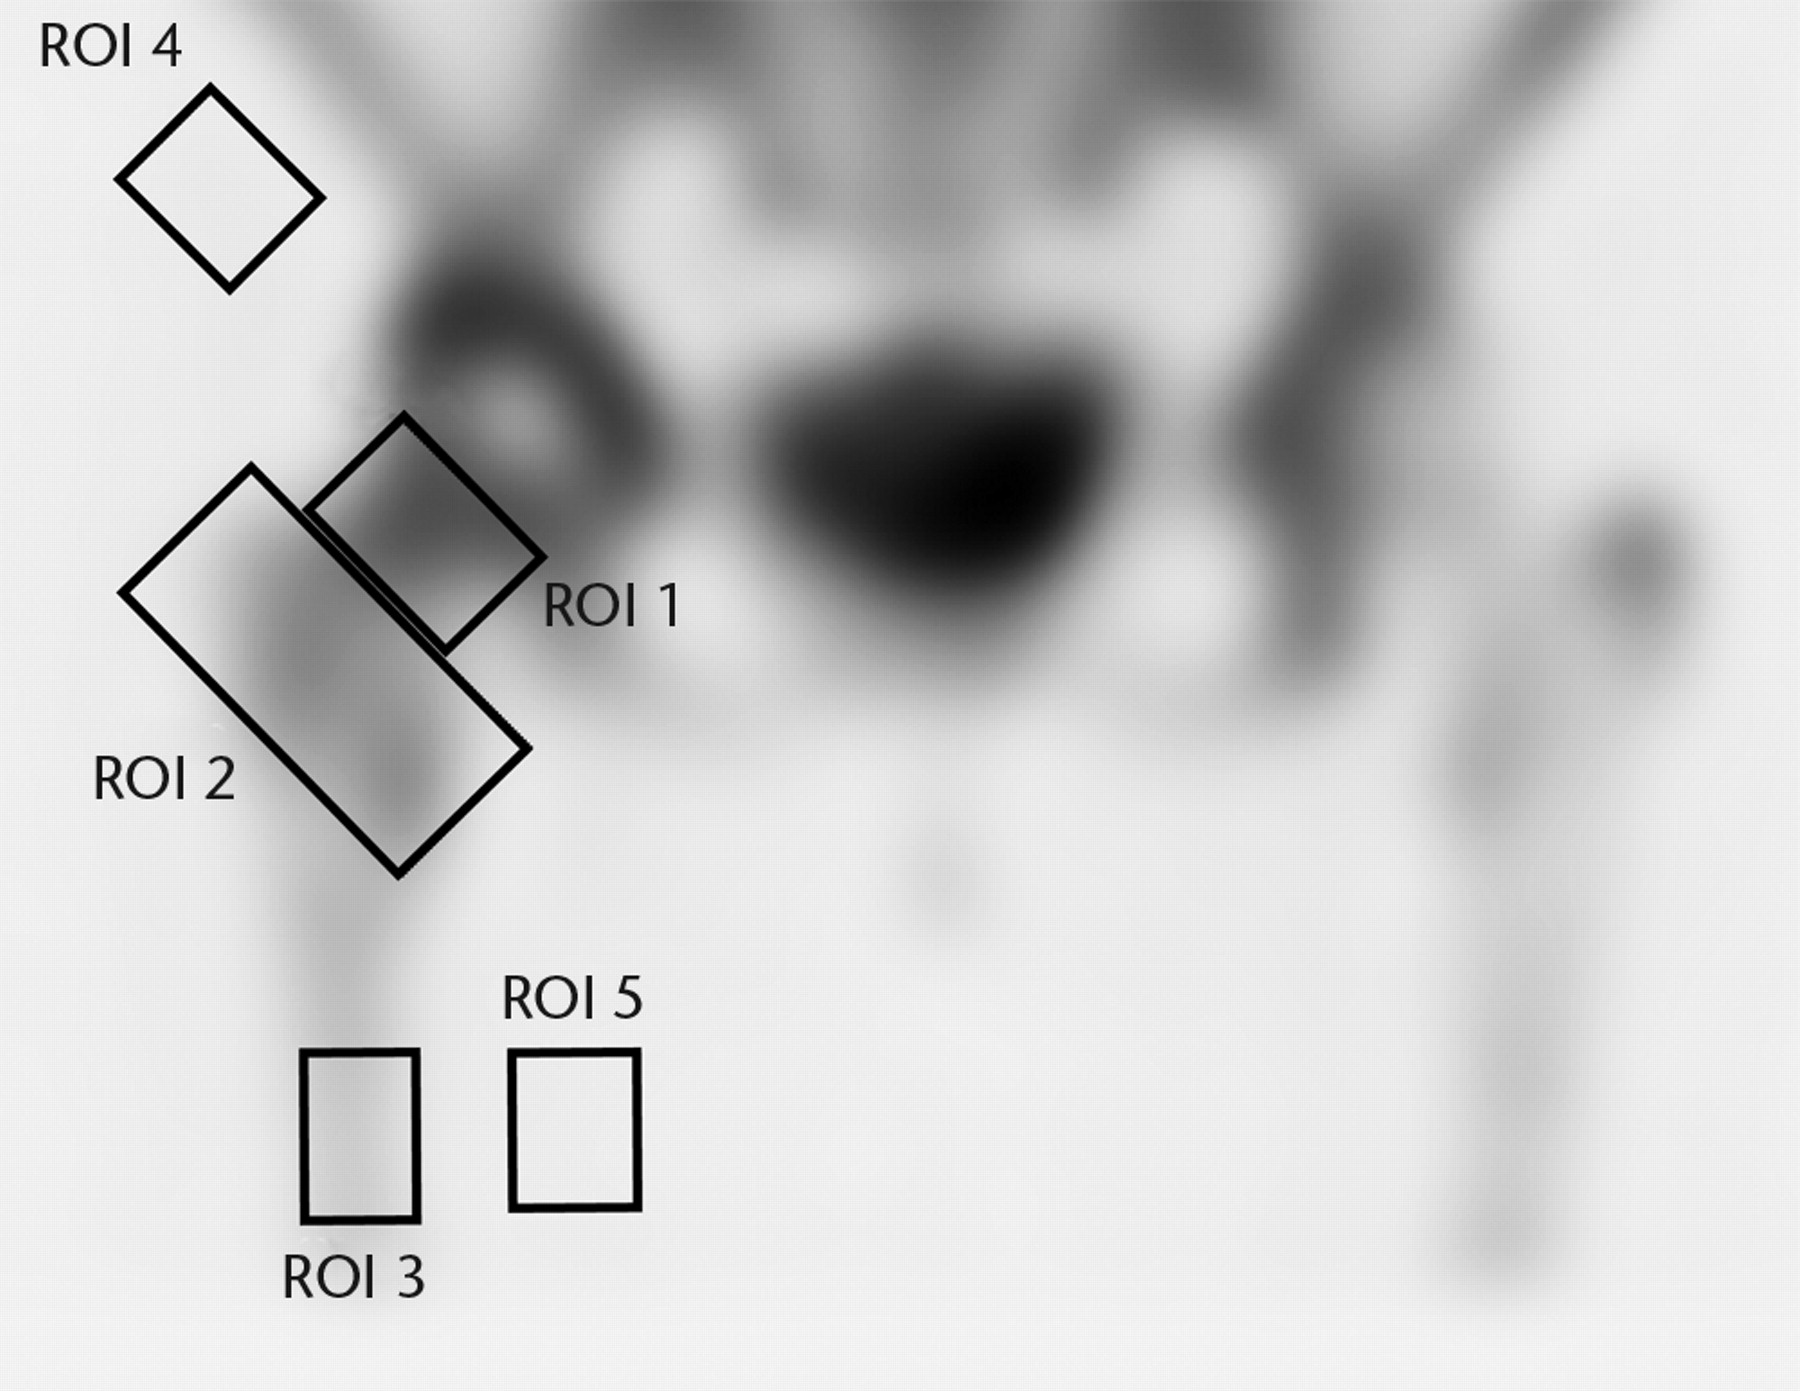 Fig. 2 
            A single photon emission computed tomography
(SPECT-CT) image showing the five regions of interest (ROIs).
          